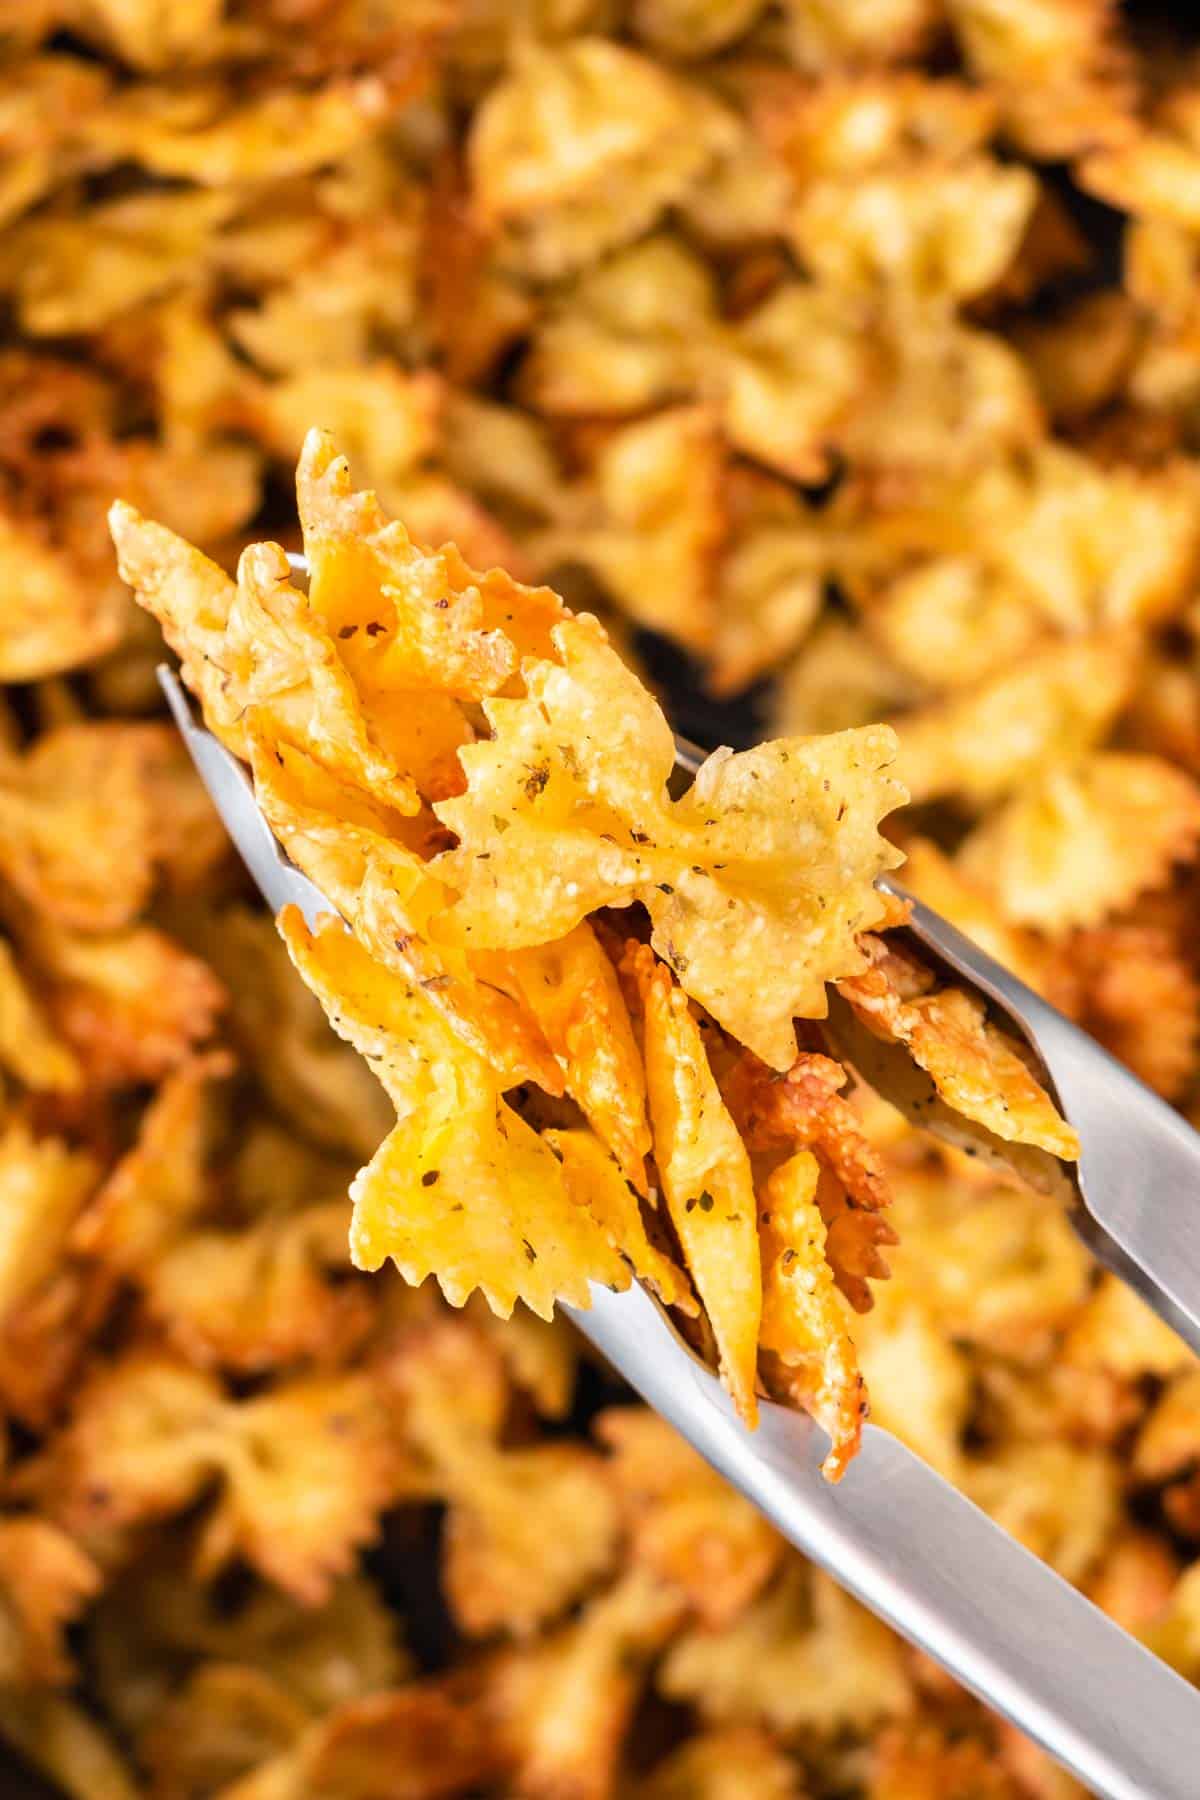 tongs taking pasta chips from the air fryer